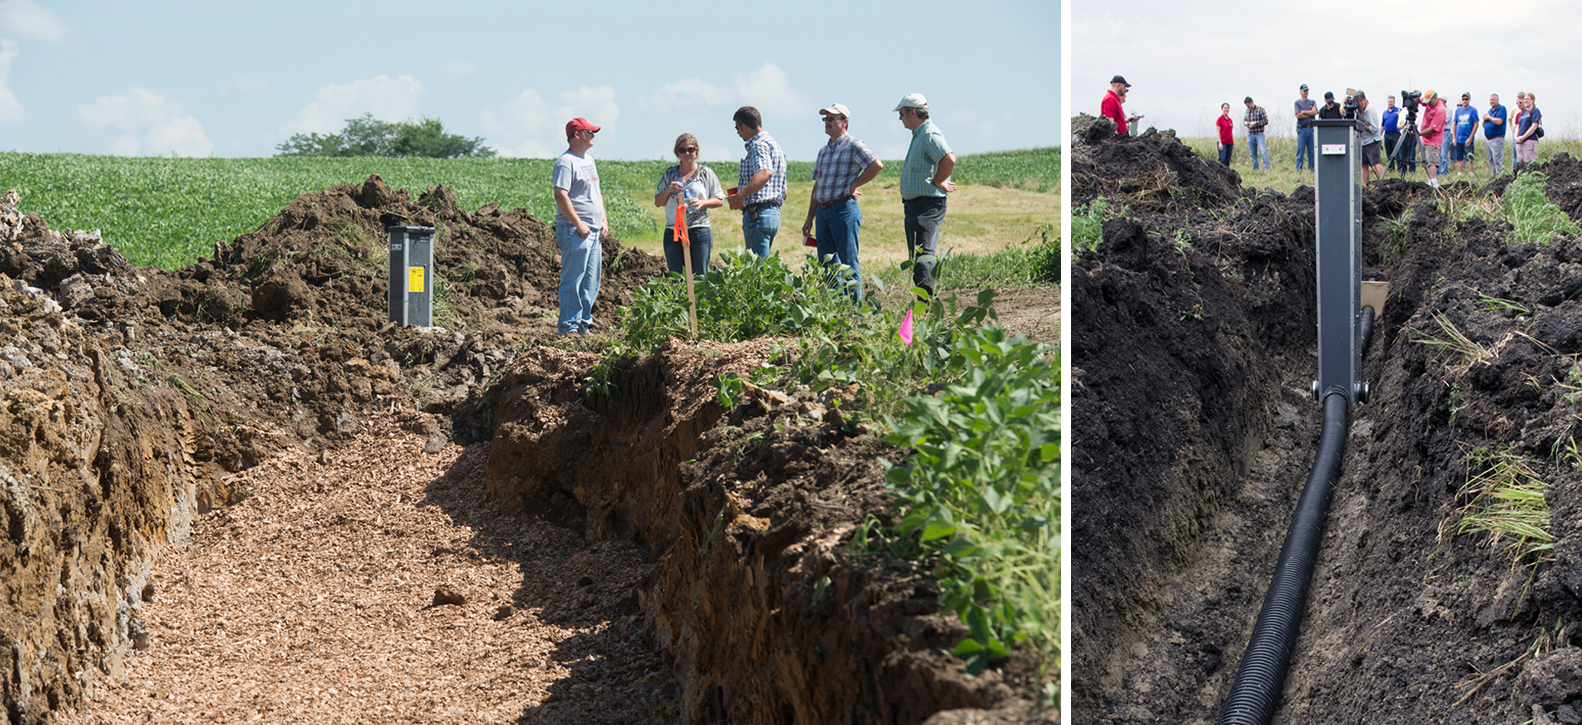 Two photos shown. The left-hand photo shows a bioreactor pit filled with woodchips, with five people standing nearby at the edge of a crop field. The right-hand photo shows a dug-out gulch containing a saturated buffer unit at a field edge, with a nearby group of people observing.